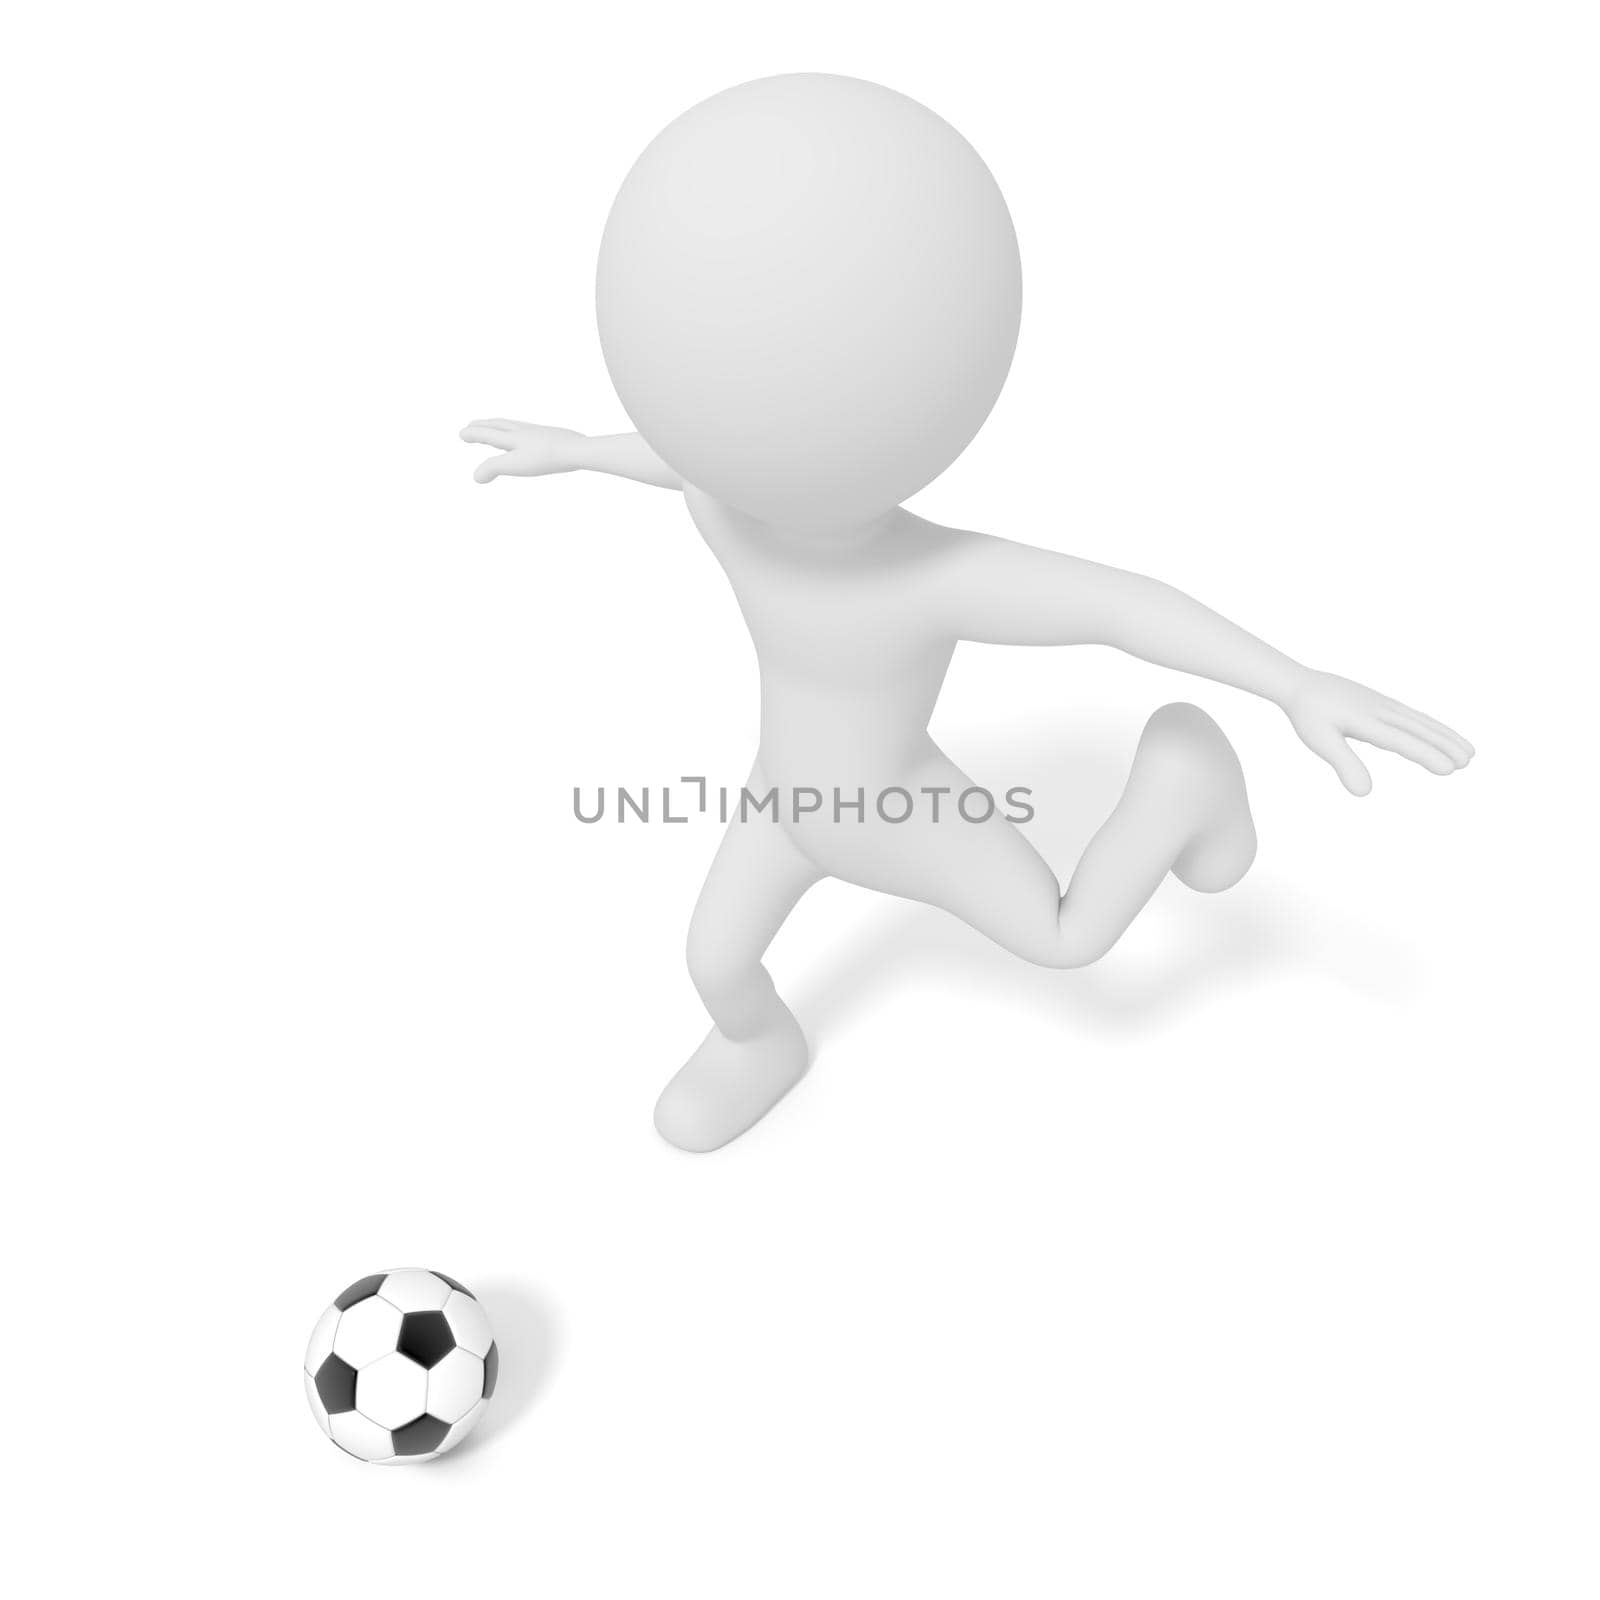 White man kicking soccer ball or football in competition match game. 3D illustration. People Model rendering graphic. isolated white background. Football league and World cup concept. Cartoon theme by MiniStocker